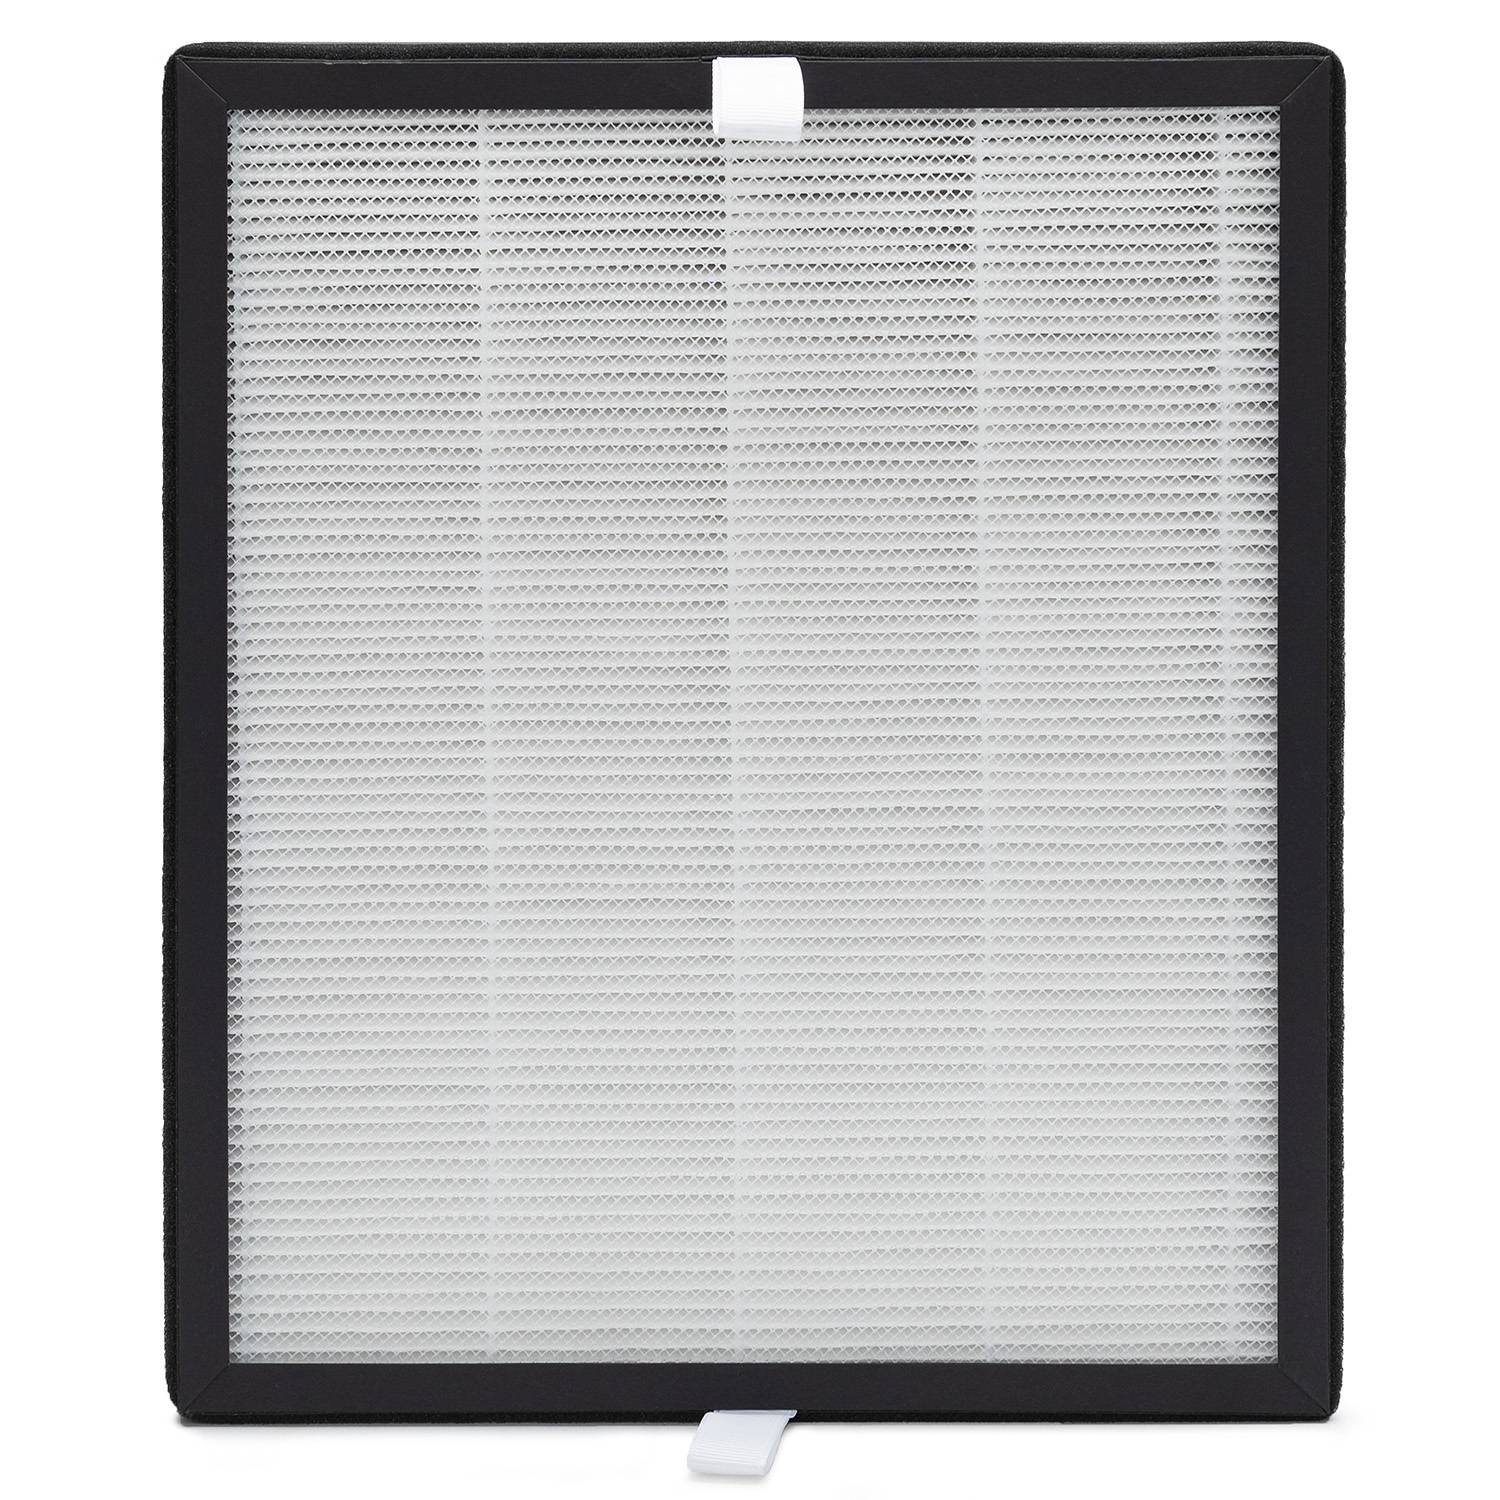 Lifestyle by Focus LS-AP200 HEPA Filter Replacement